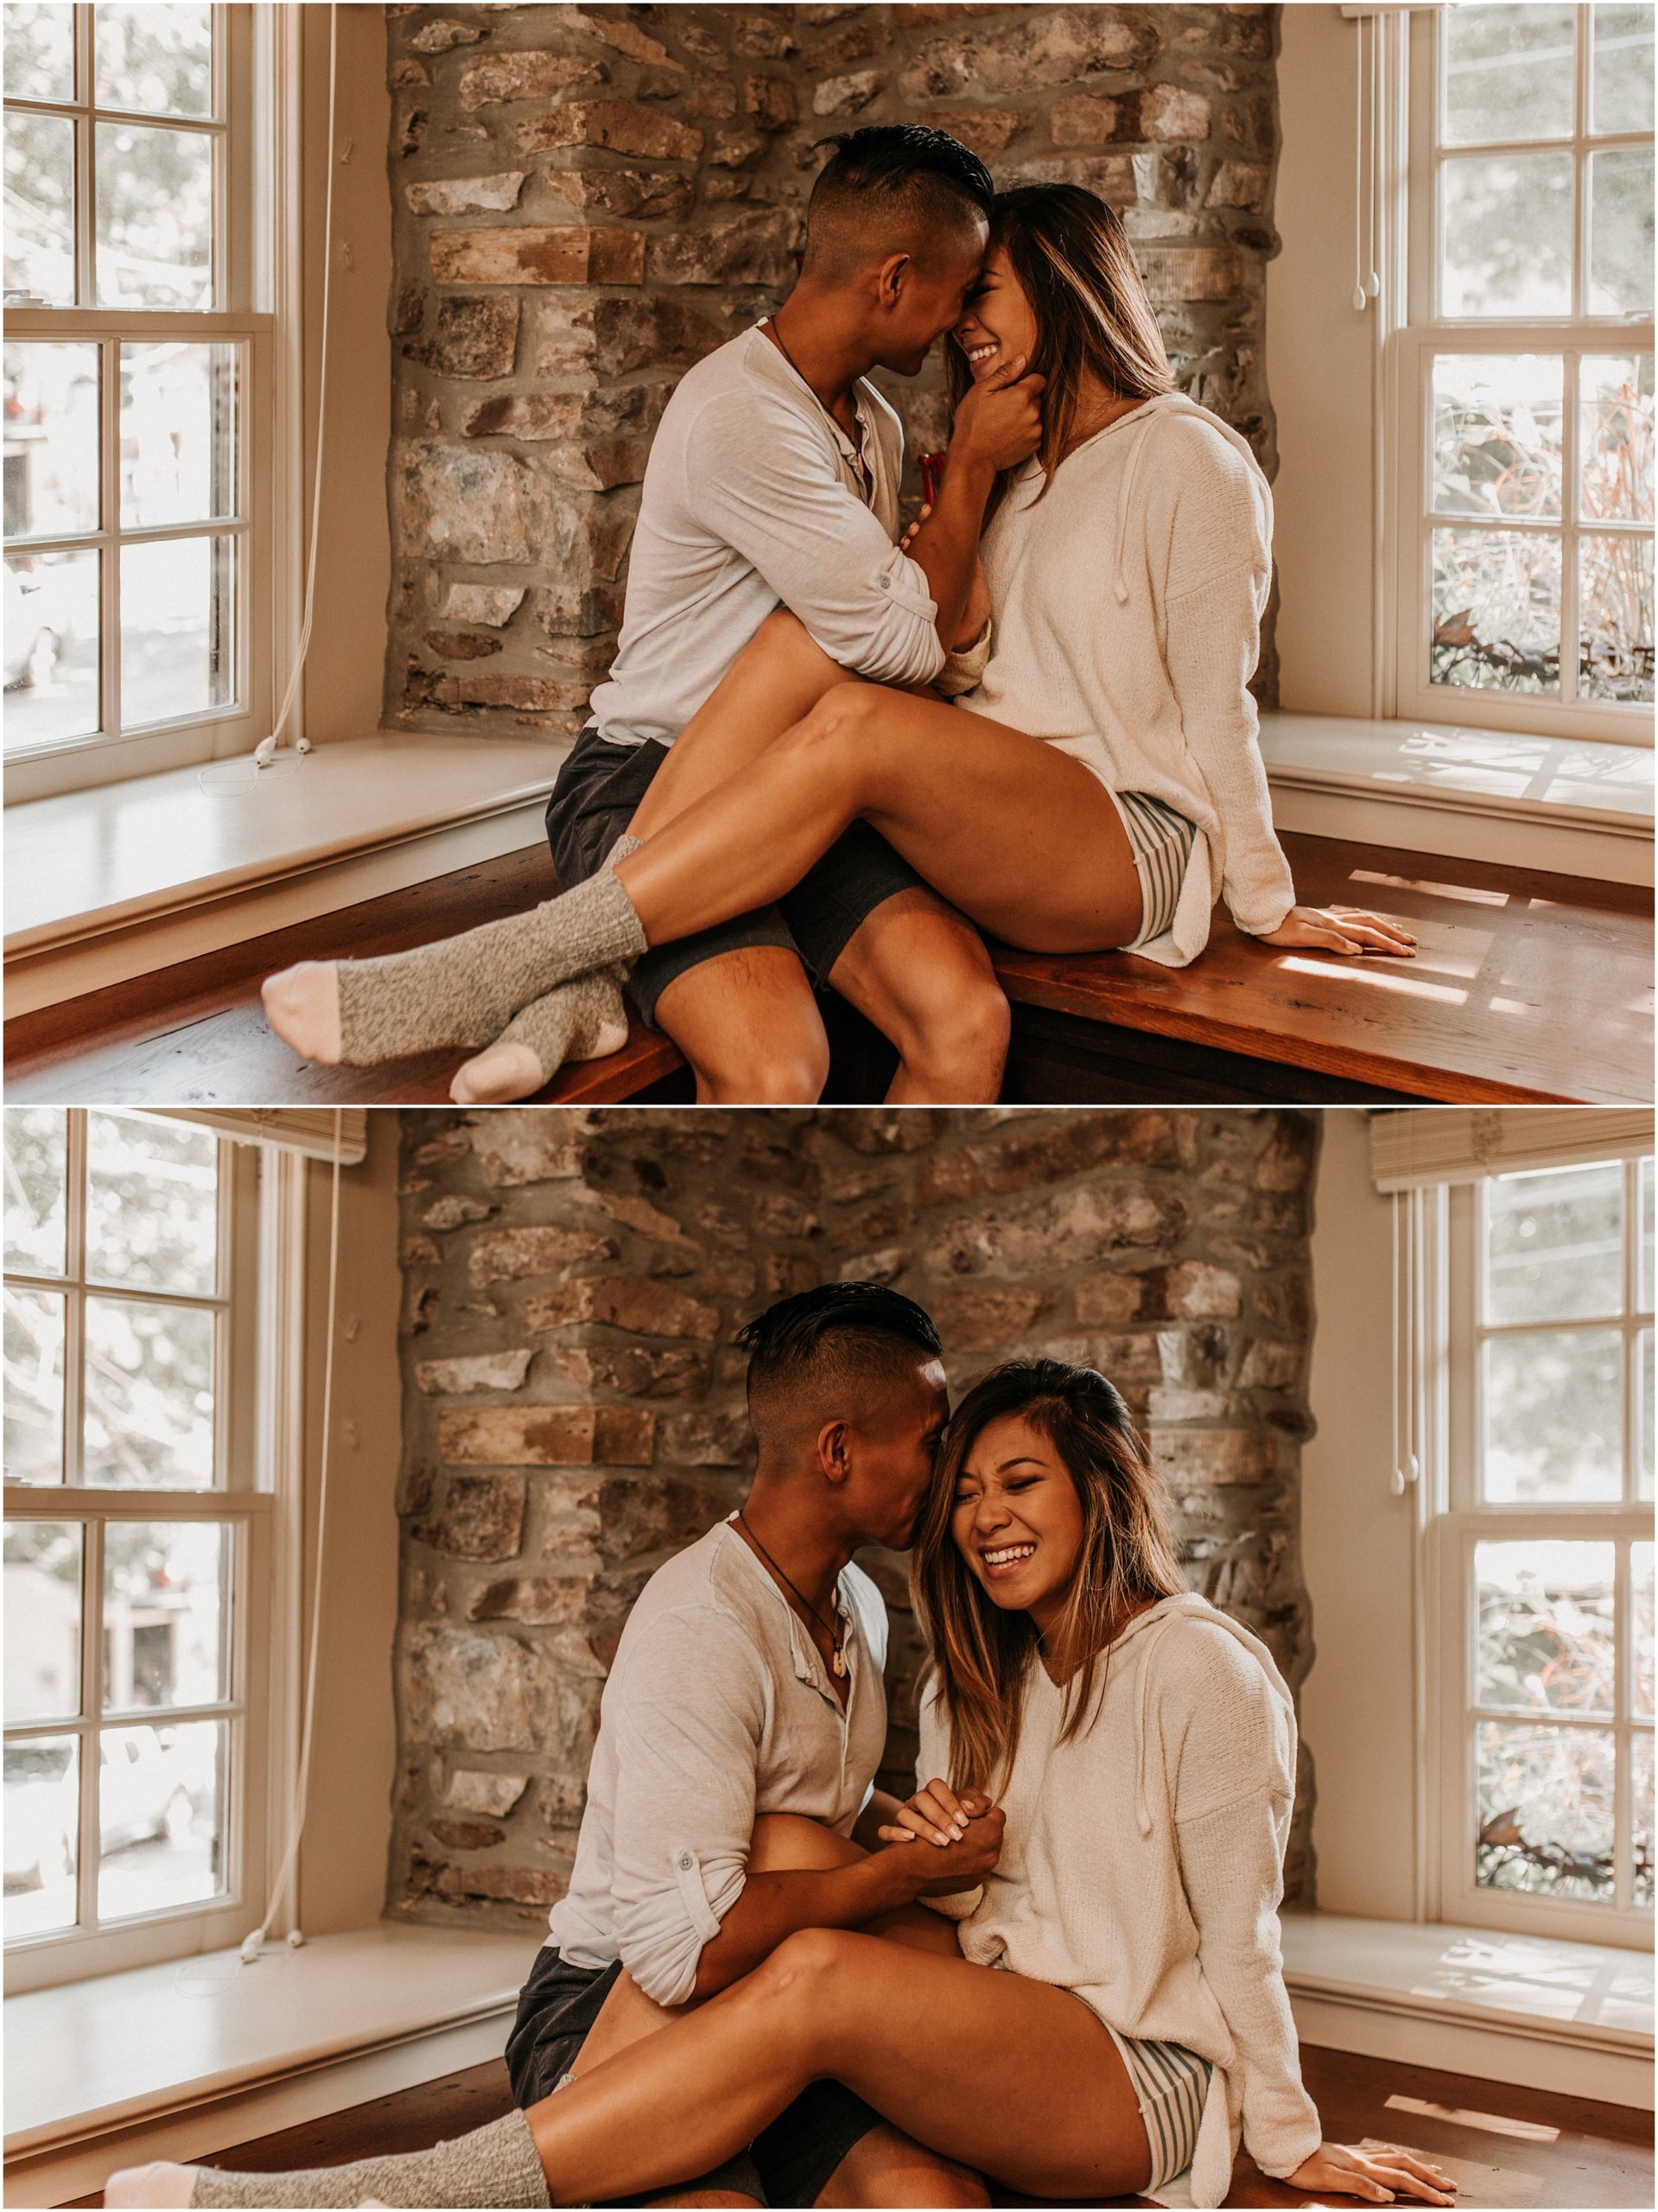 In-Home Baking Couples Session at The Carriage House of New Hope, PA